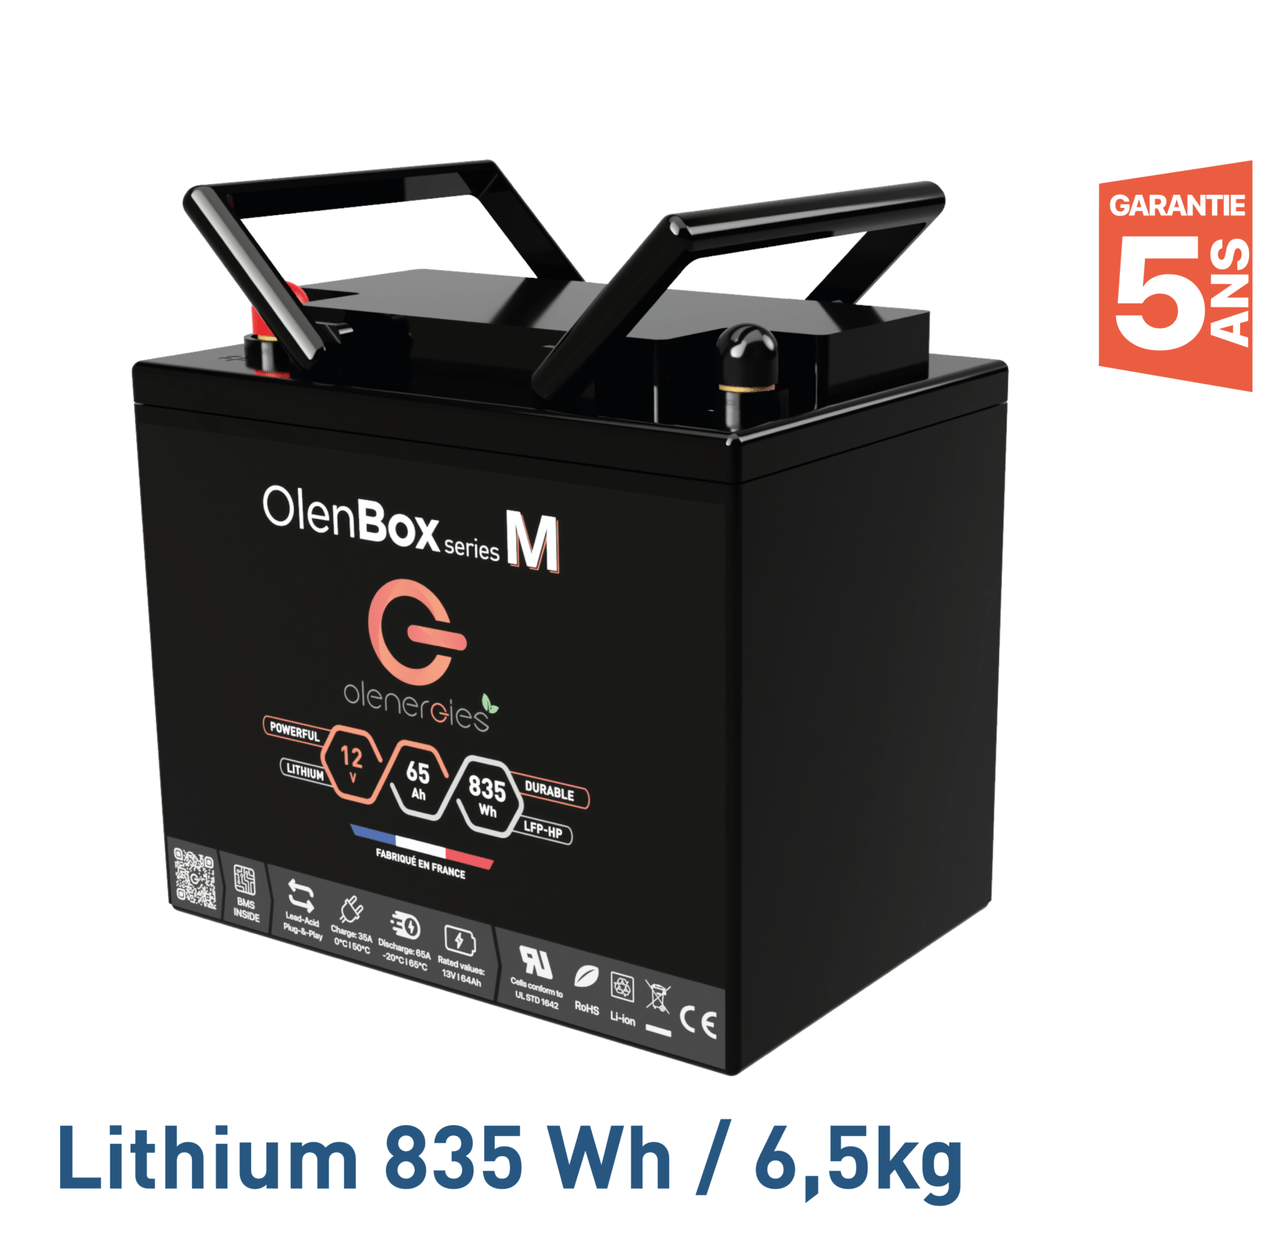 batterie olenbox lithium lfp serie m 835wh 12v 24v France Battery Batterie Lithium OlenBox M series - 835Wh The specialist in lithium batteries and electrical equipments